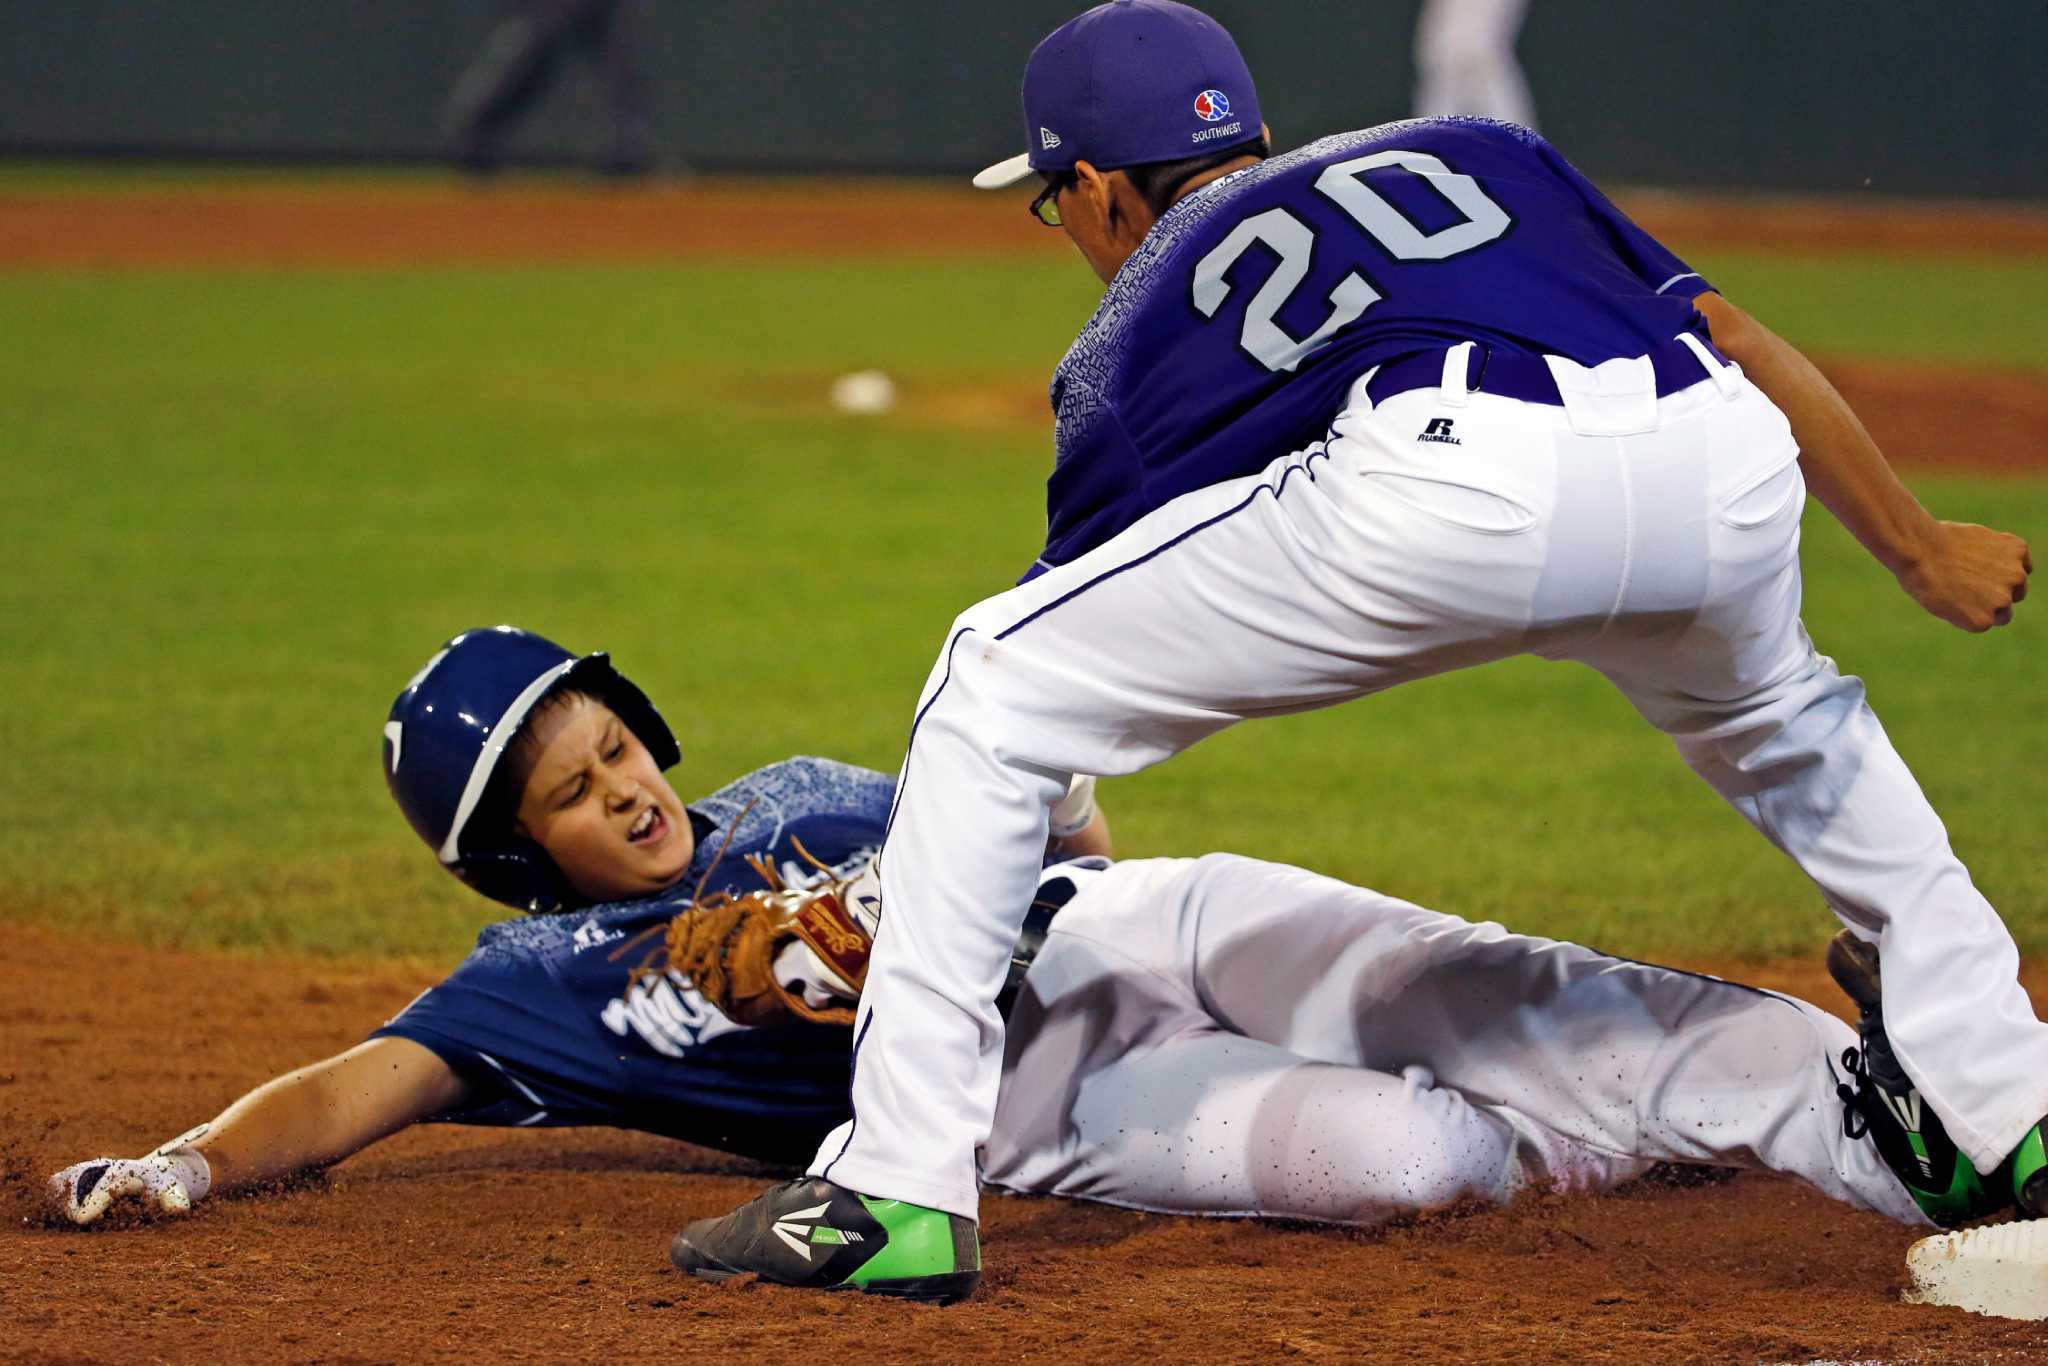 Pearland falls to elimination bracket of Little League World Series after  loss